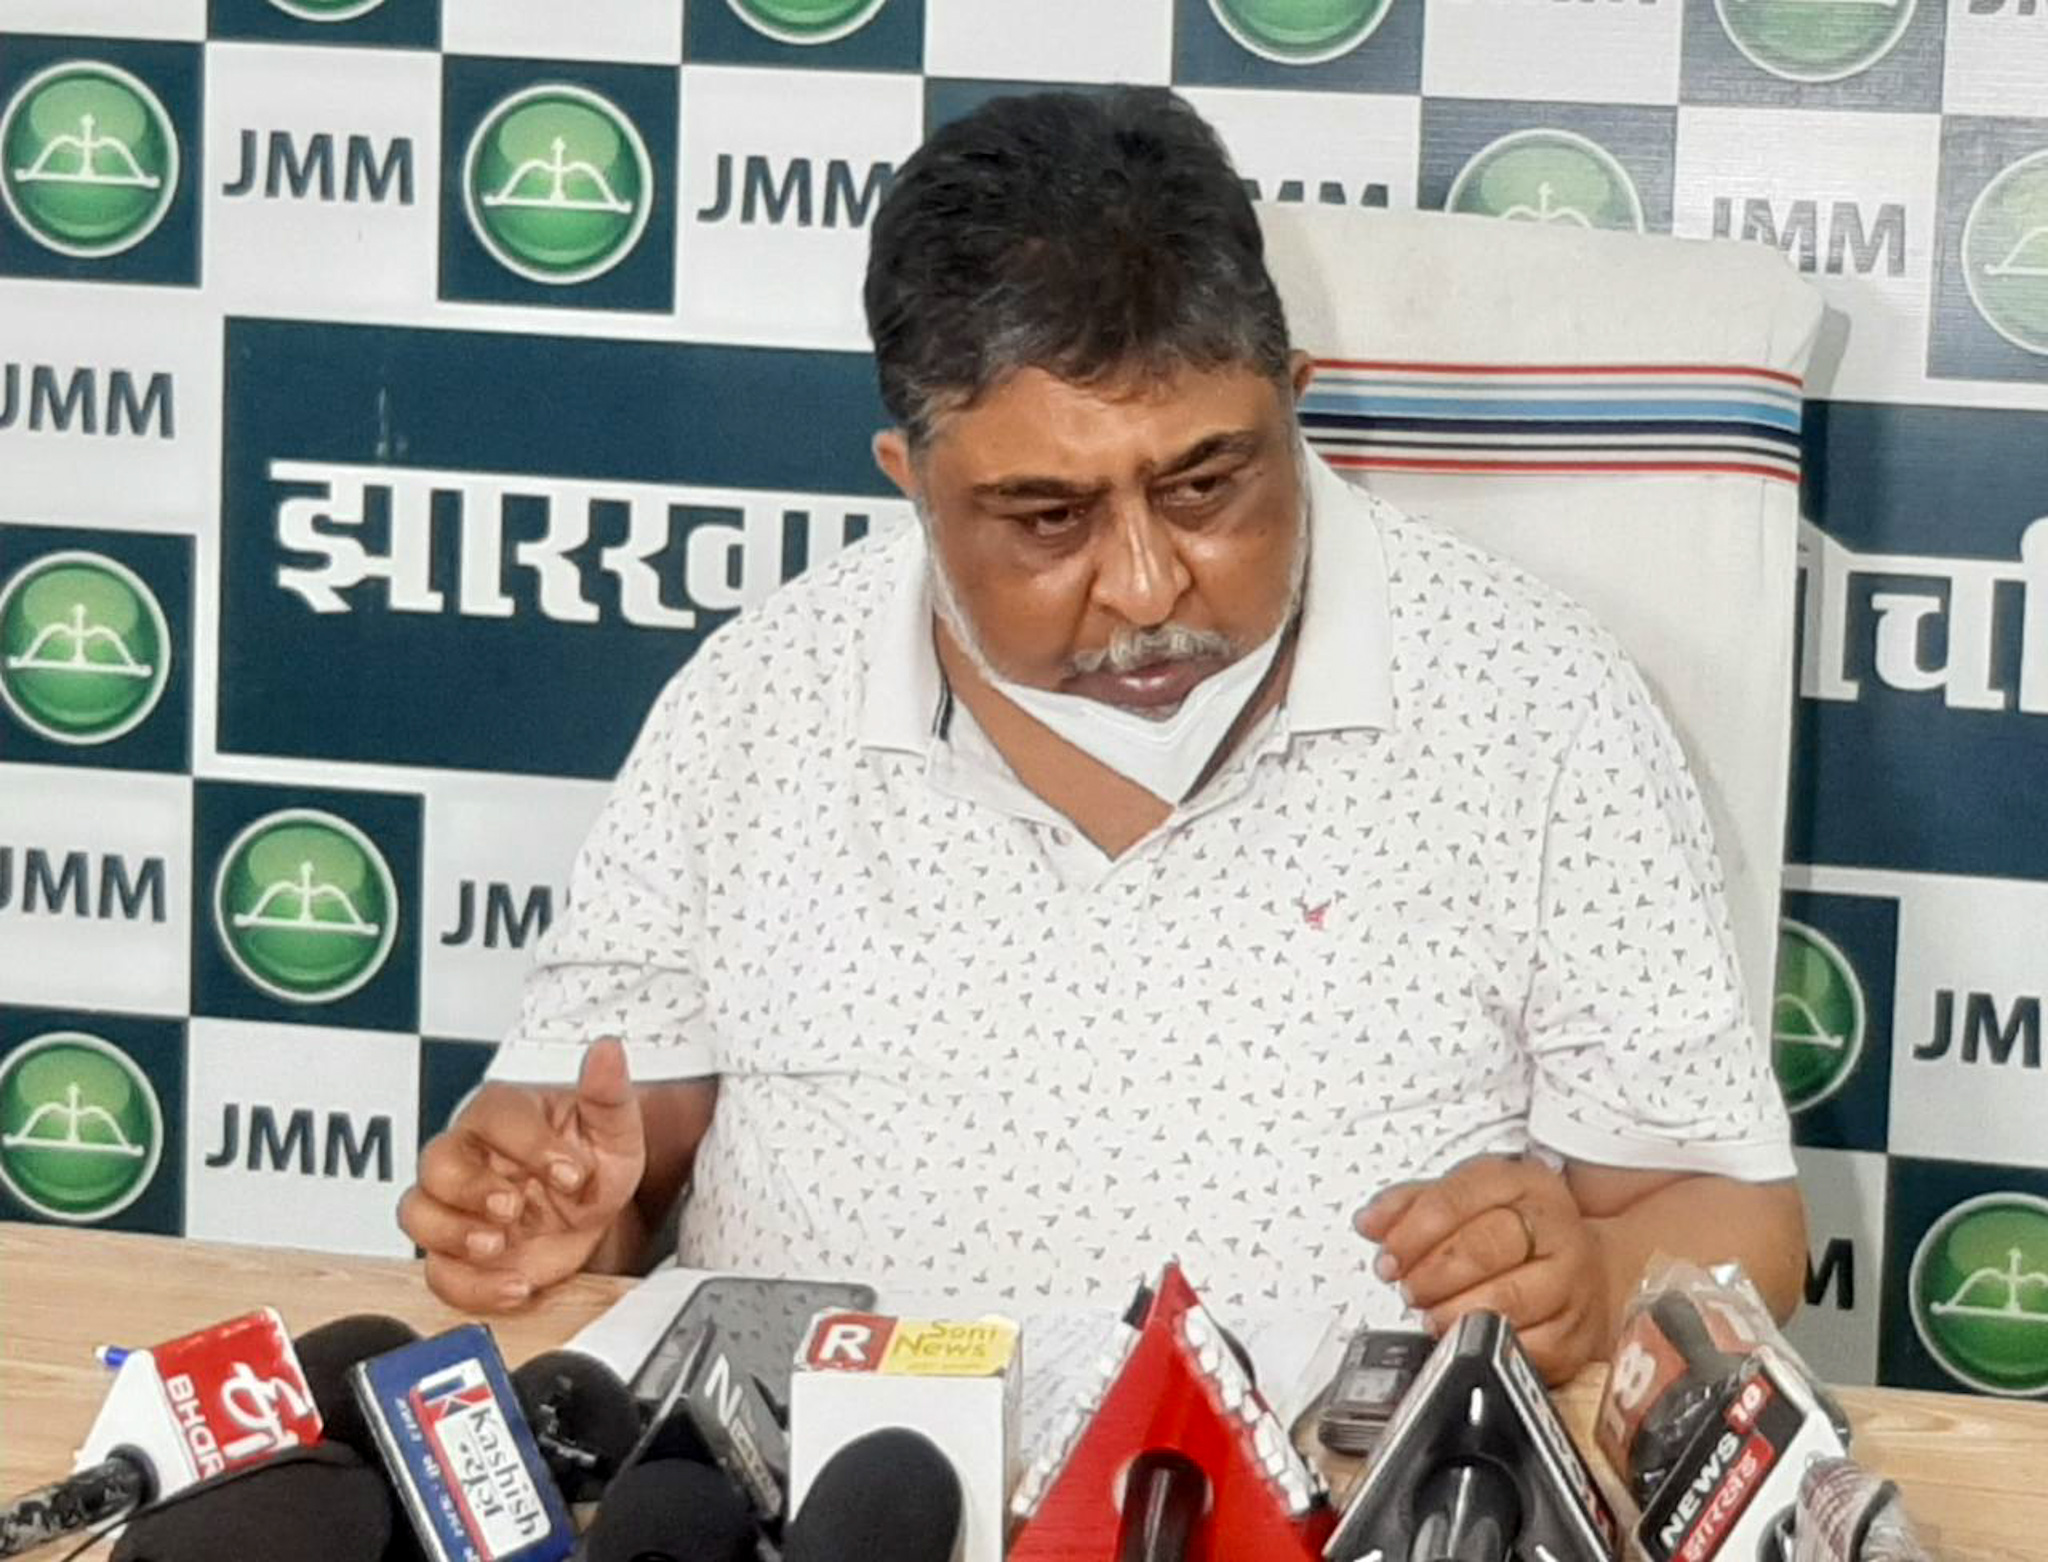 JMM leader Supriyo Bhattacharya addressing a press conference at his office in Ranchi on Tuesday. 